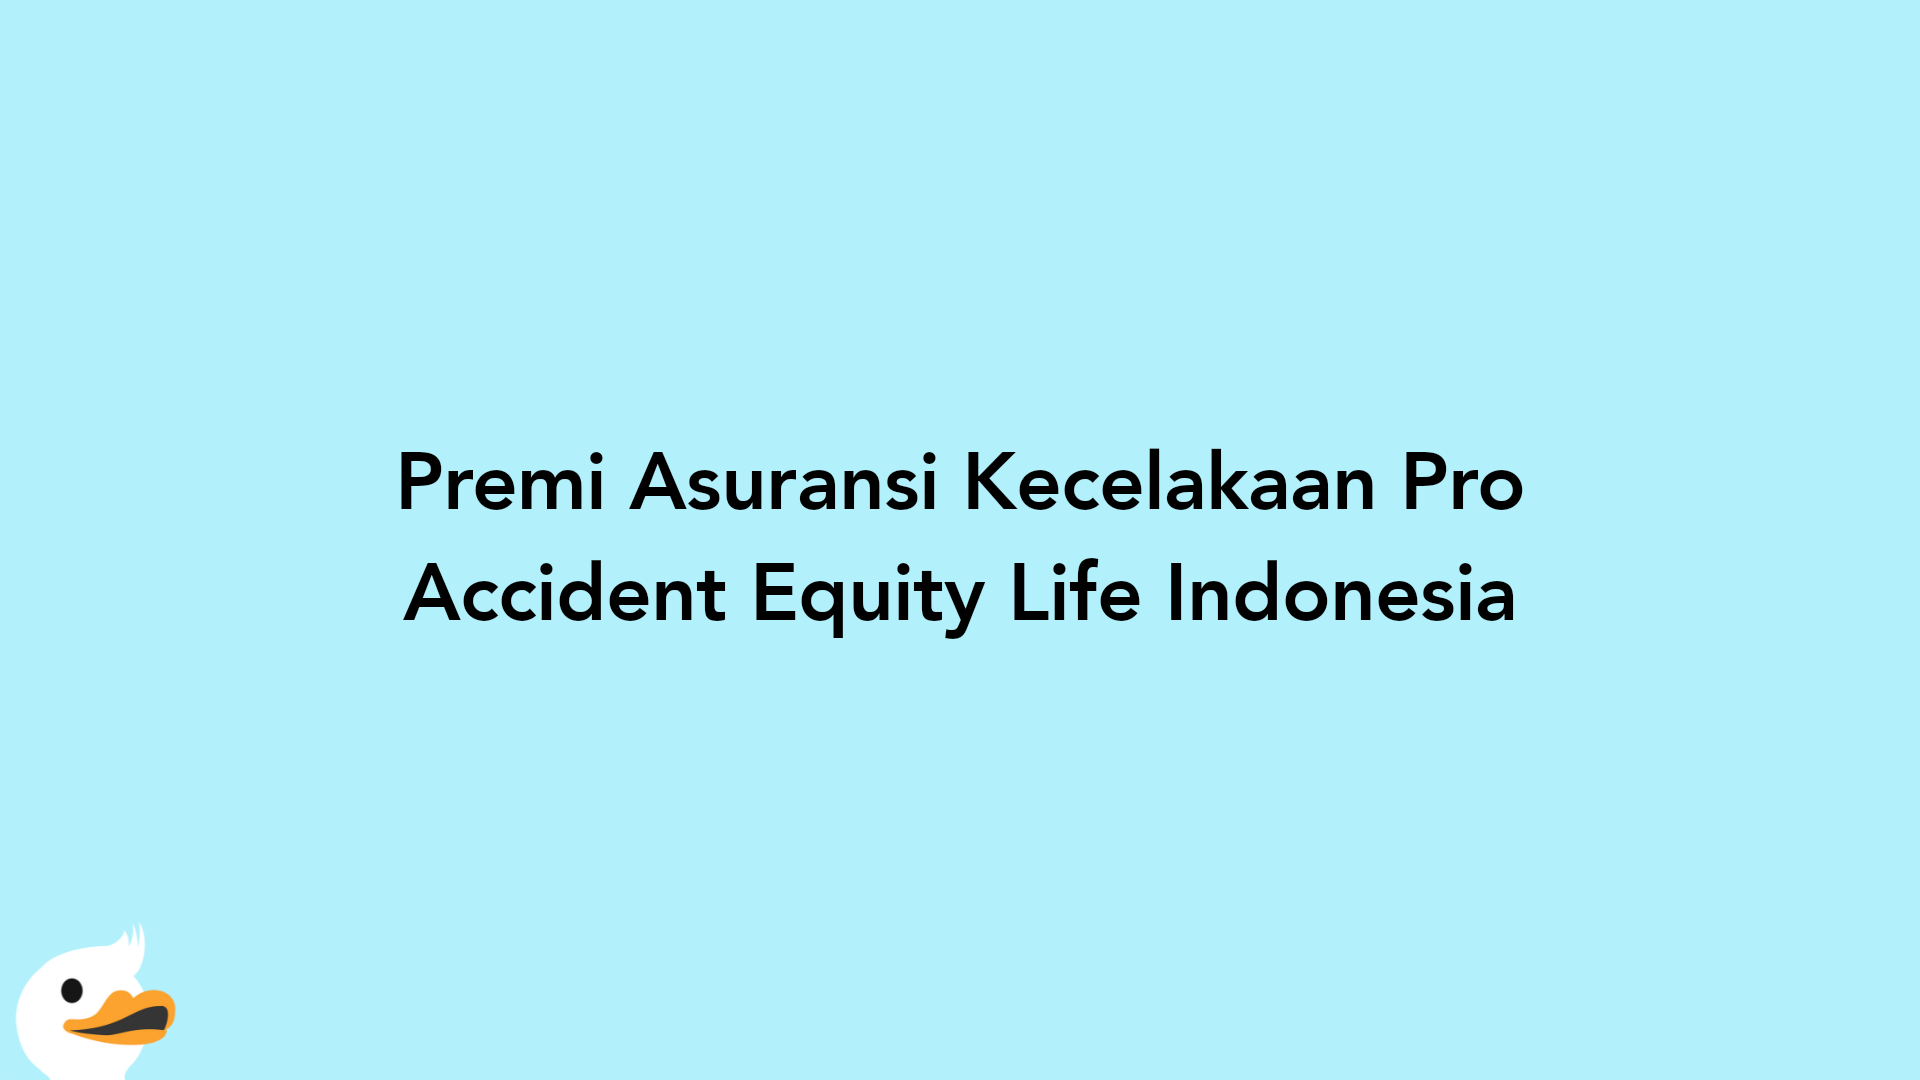 Premi Asuransi Kecelakaan Pro Accident Equity Life Indonesia